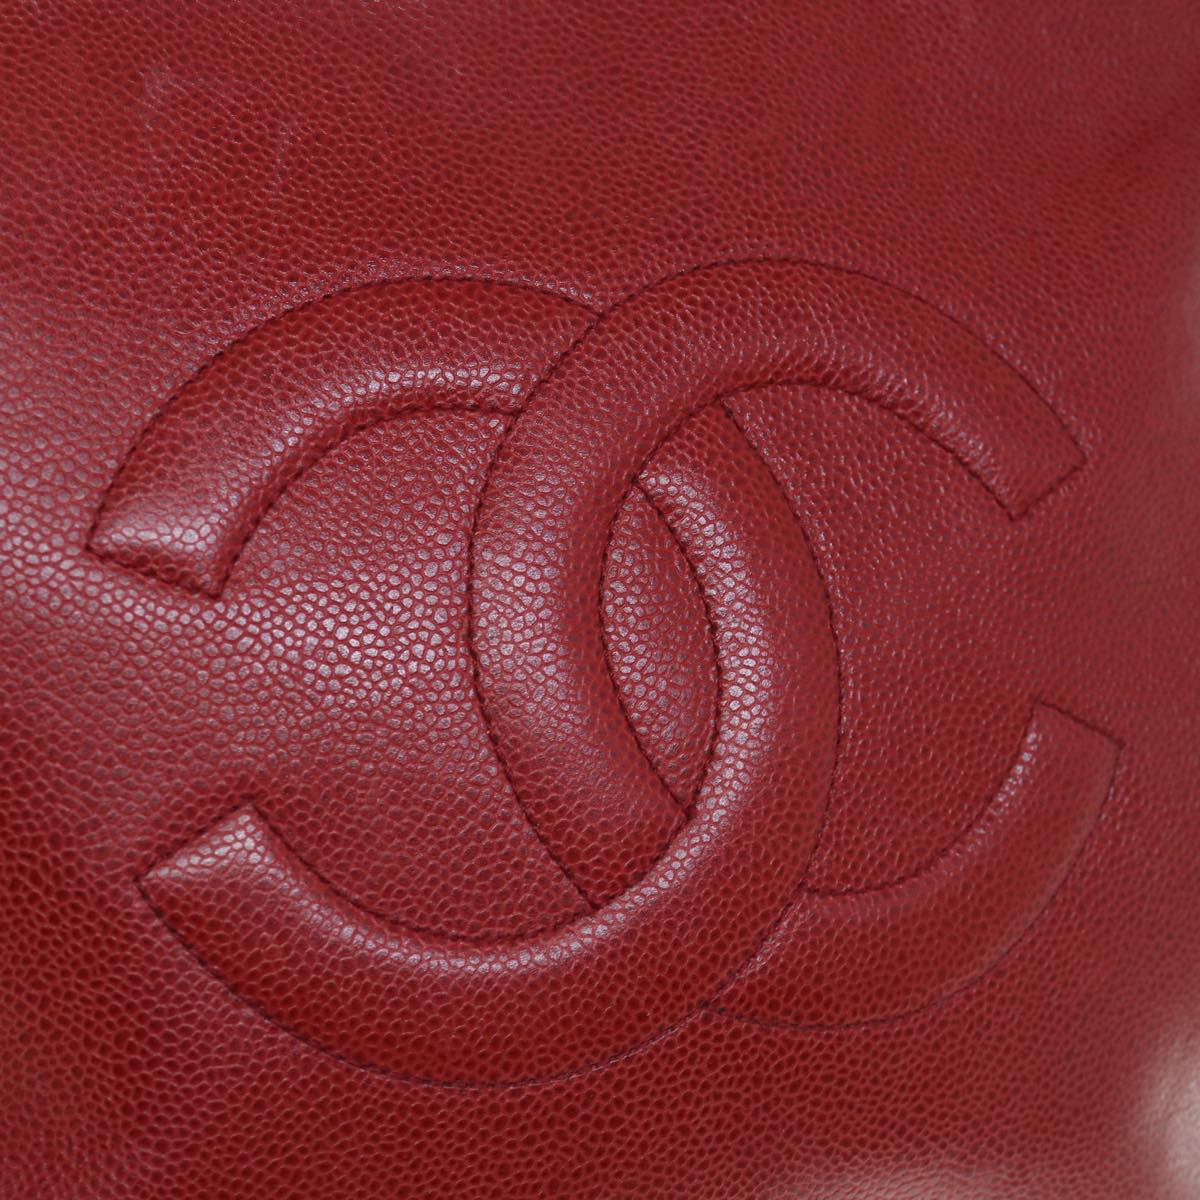 CHANEL Shoulder Bag Caviar Skin Red CC Auth bs11402